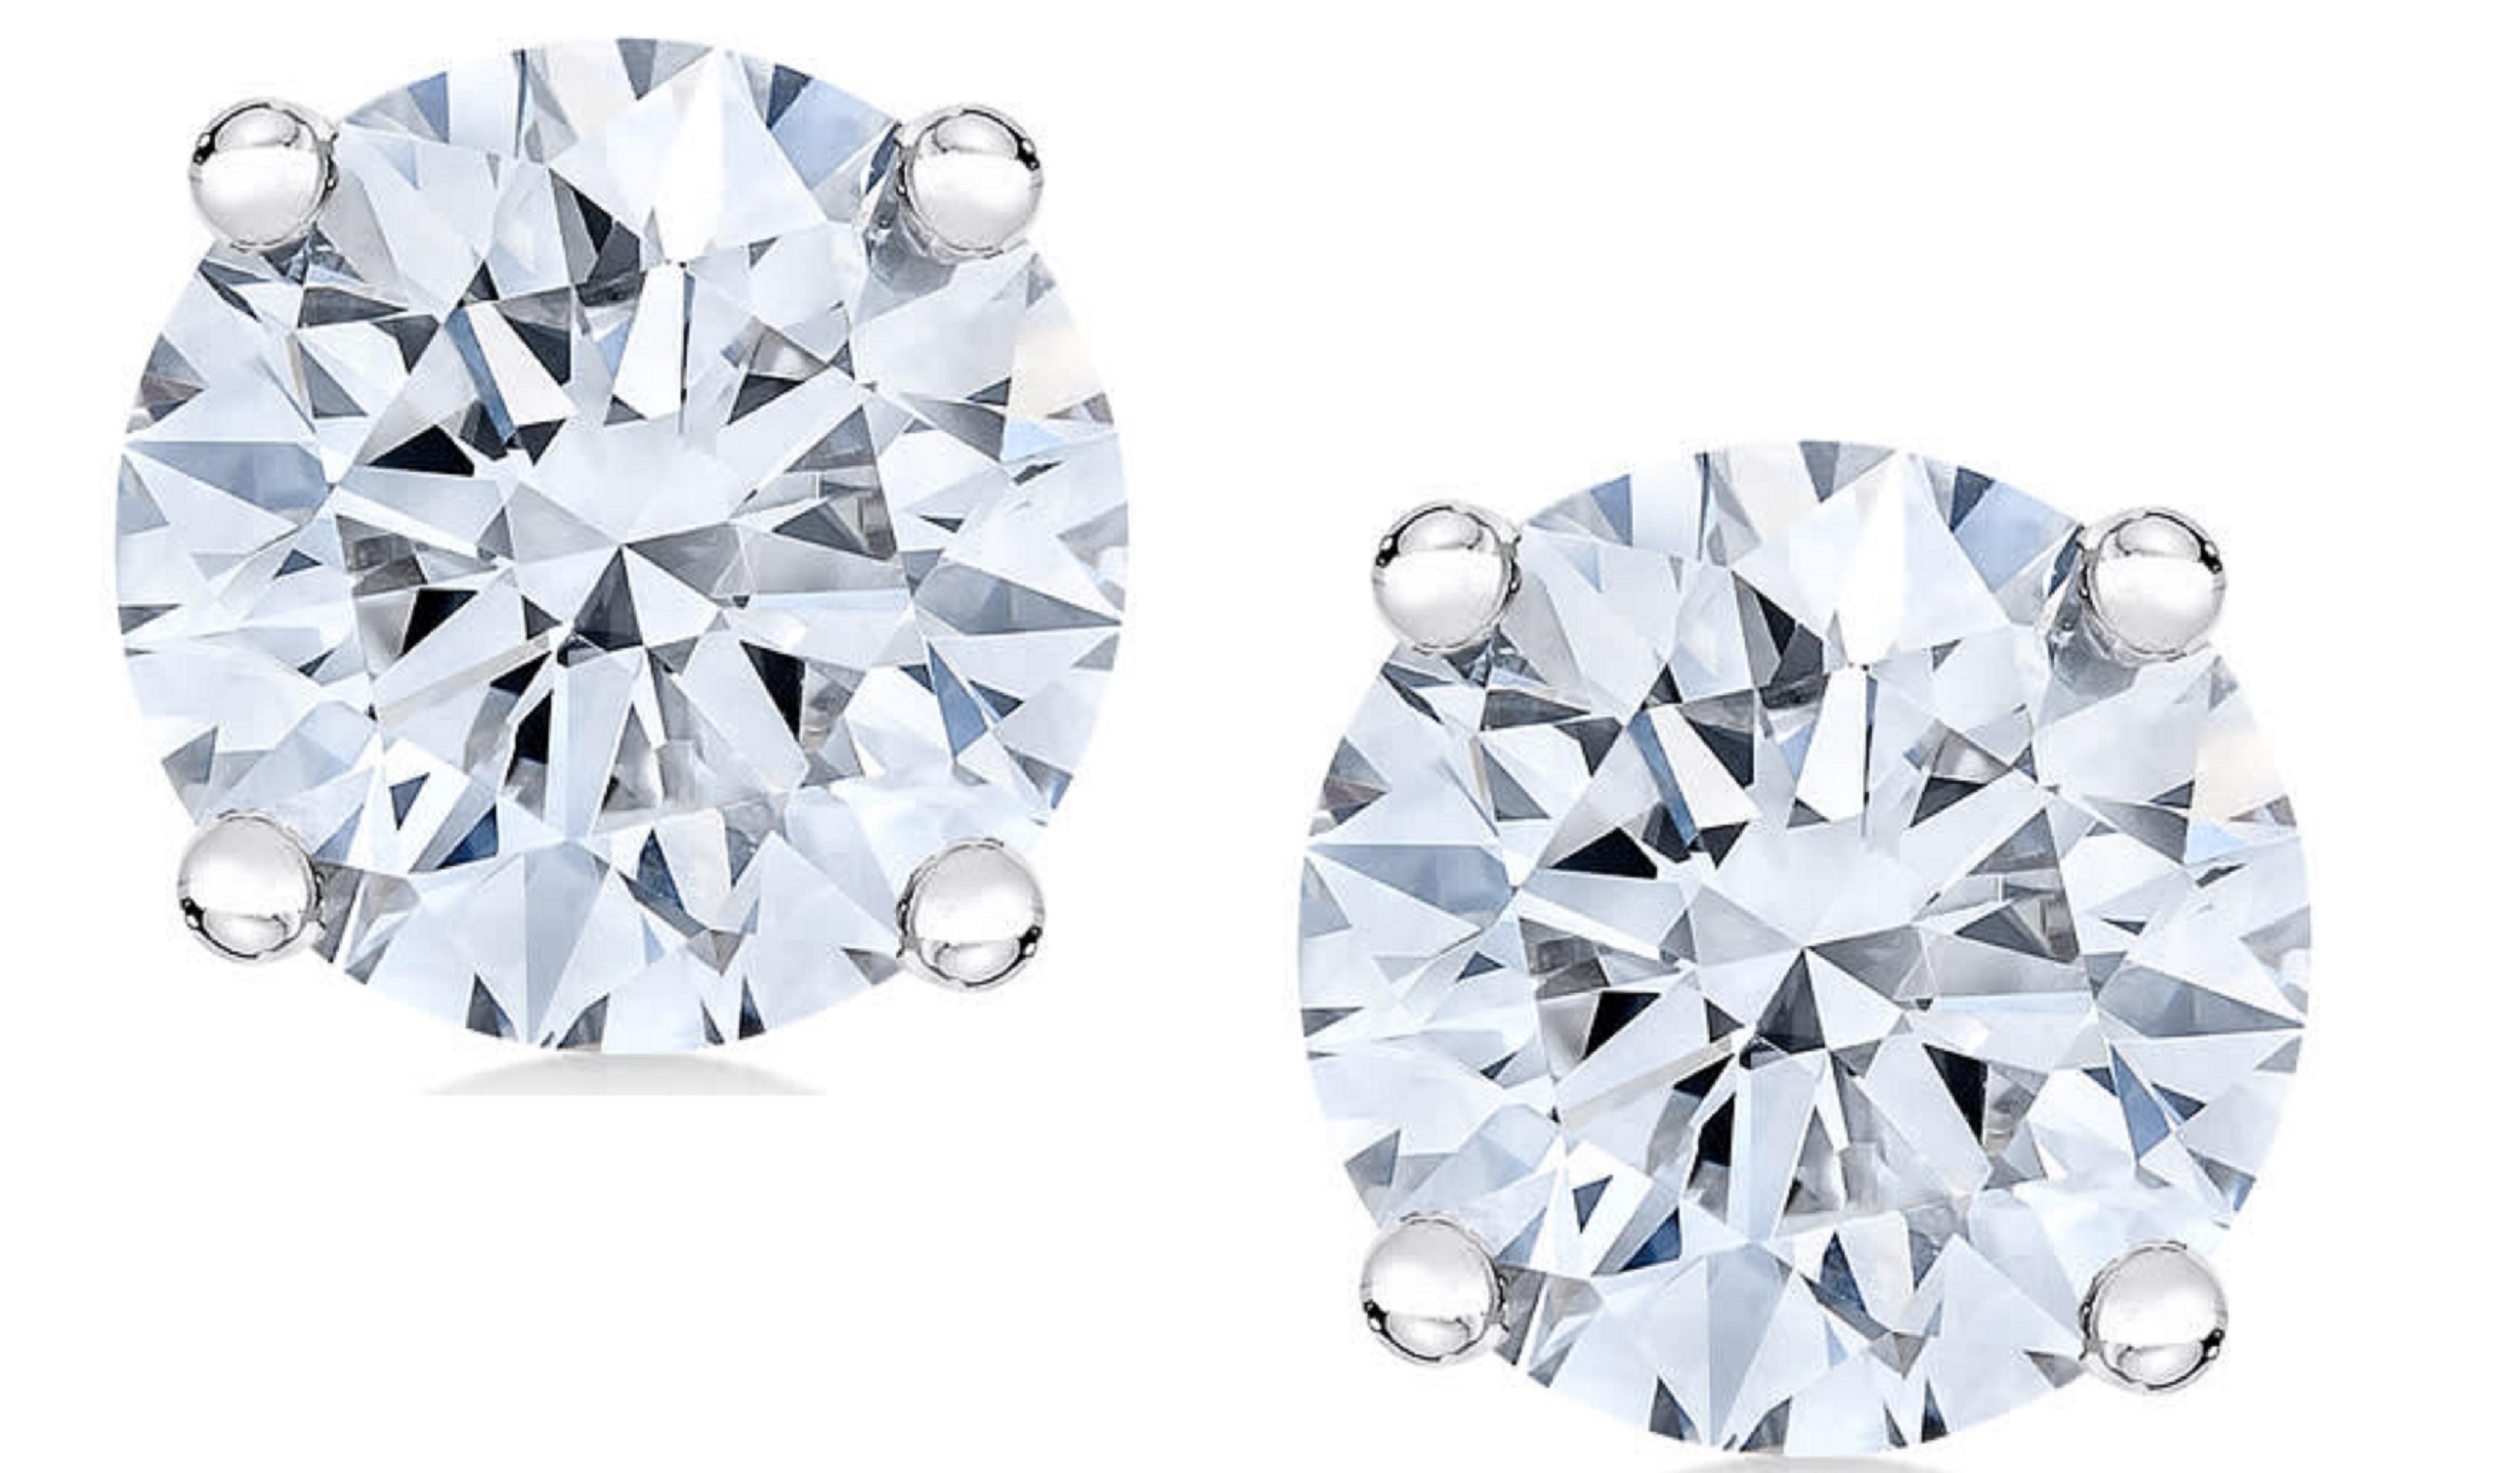 
A perfect match both stones weight 4 carats together
Excellent Proportions
VVS2 clarity
D color